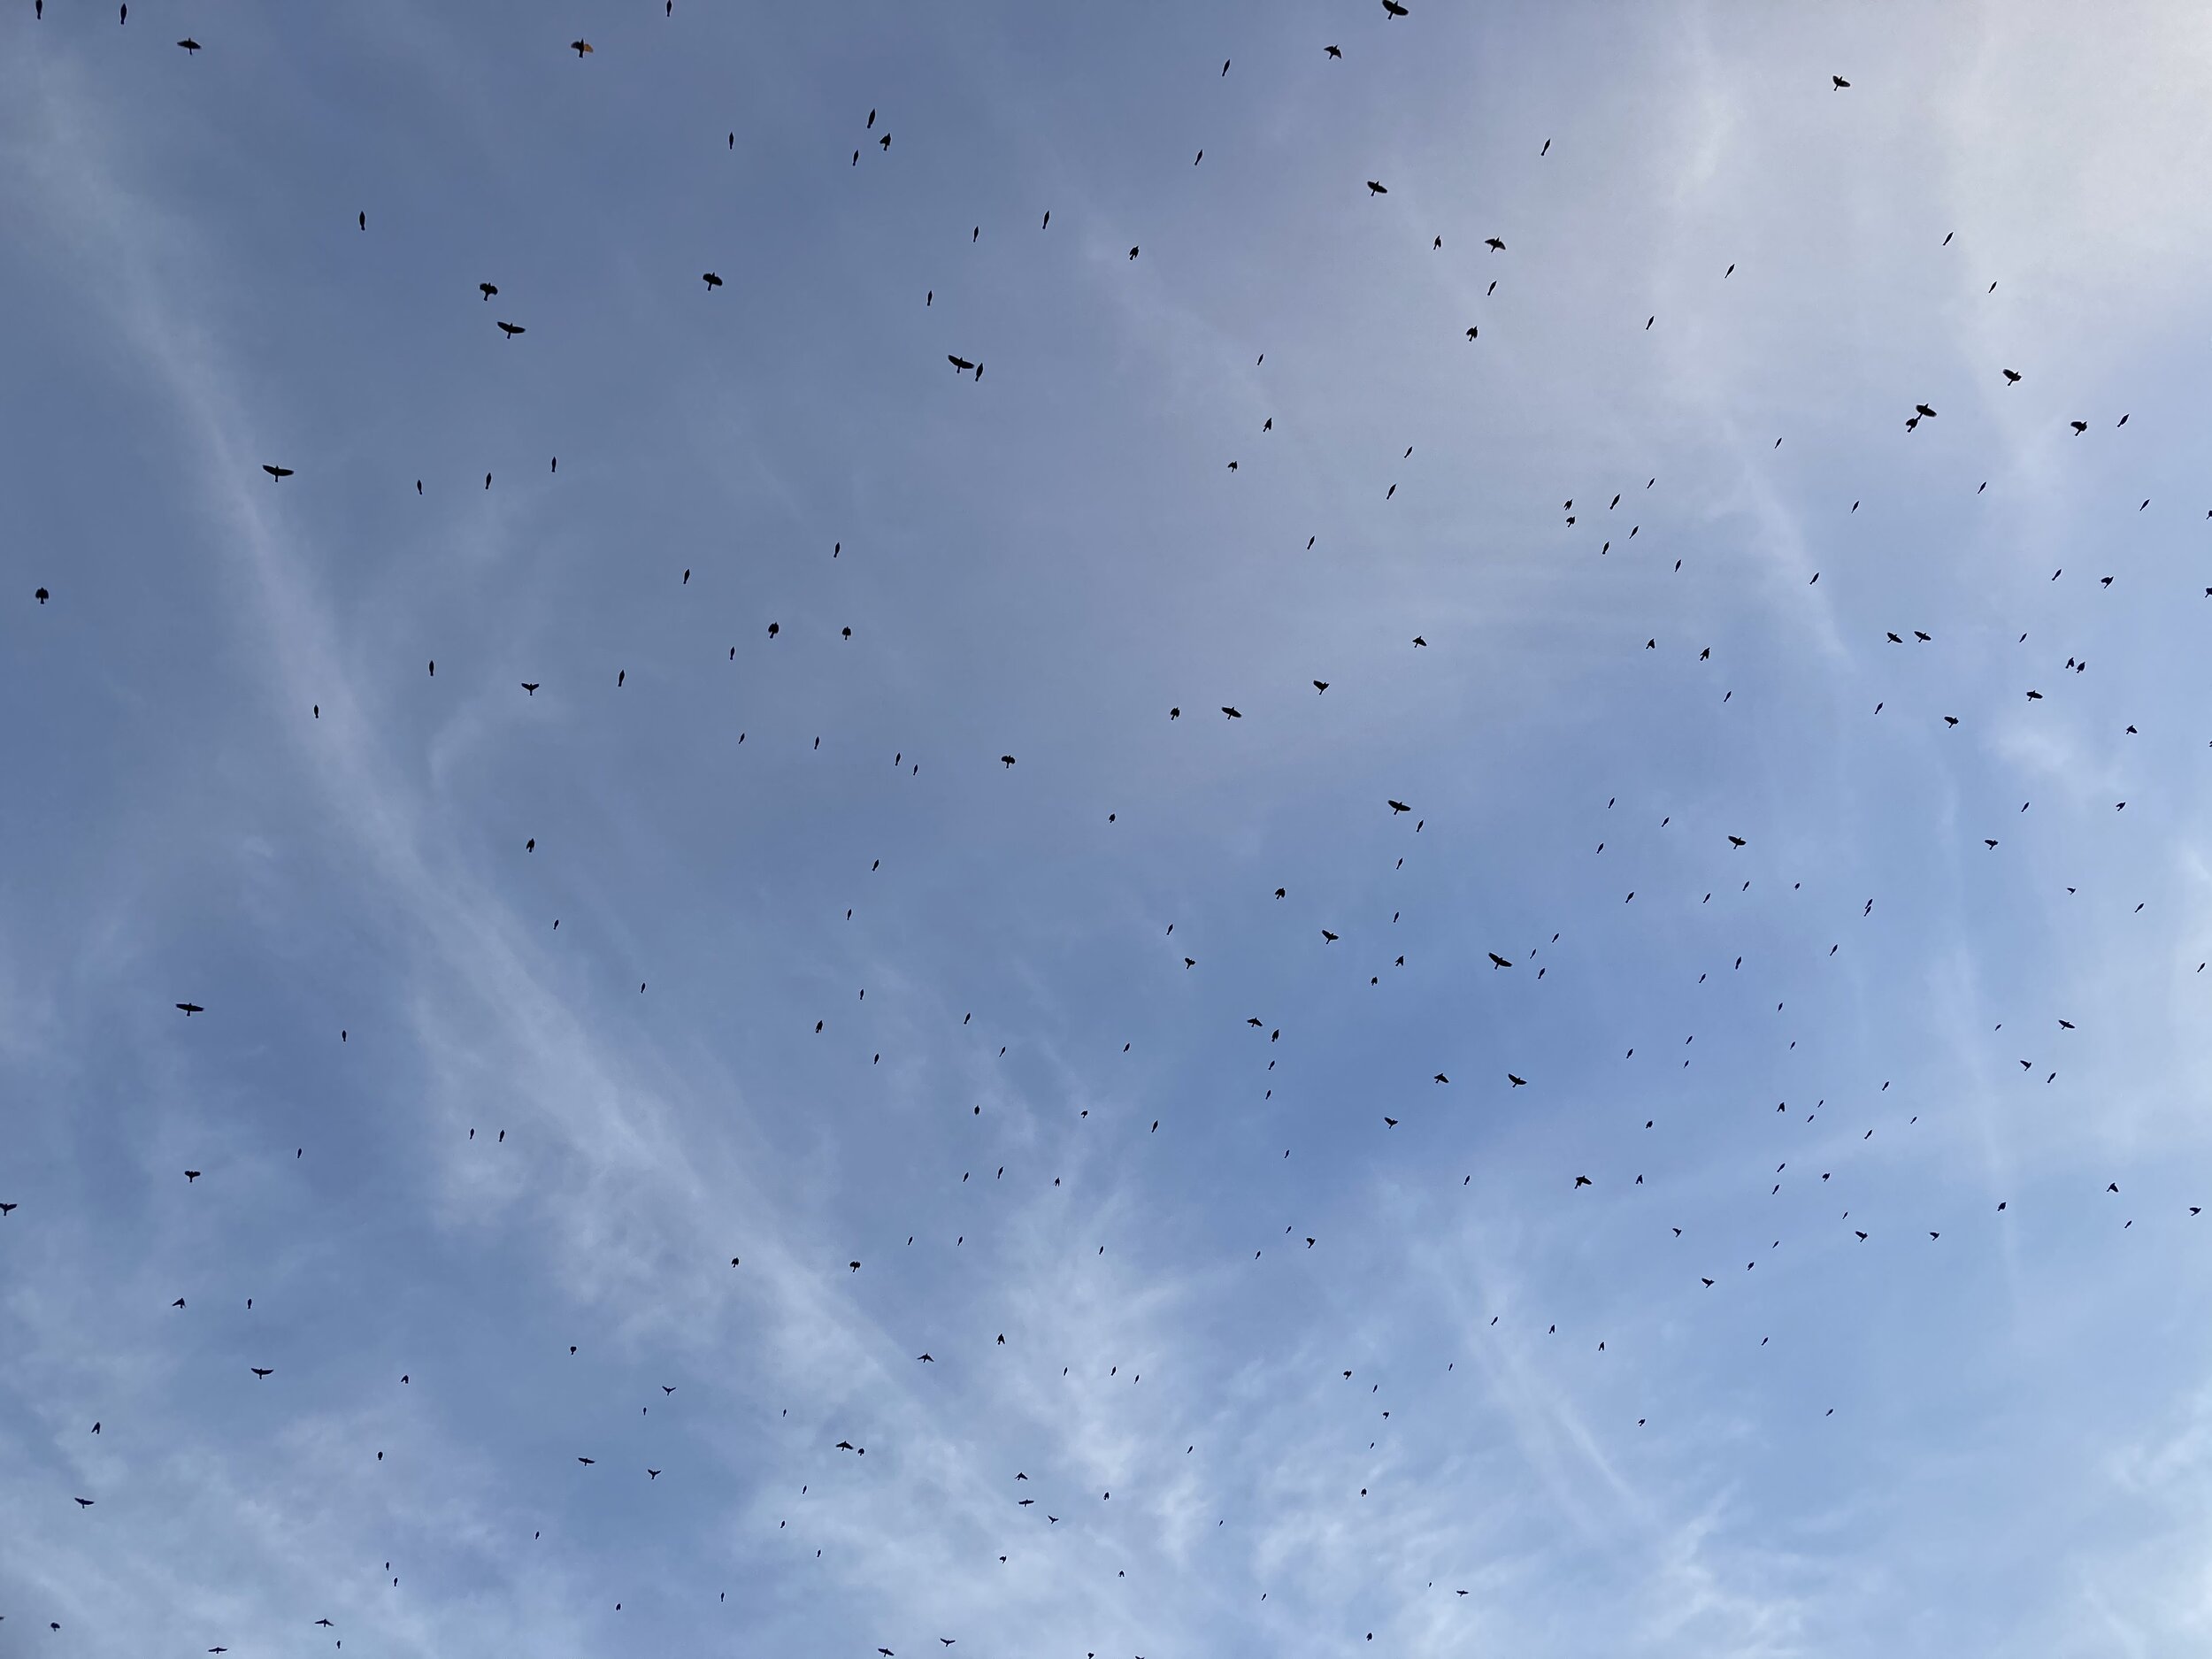 Assorted blackbird species overhead, a typical view during this past week's morning flight observations.